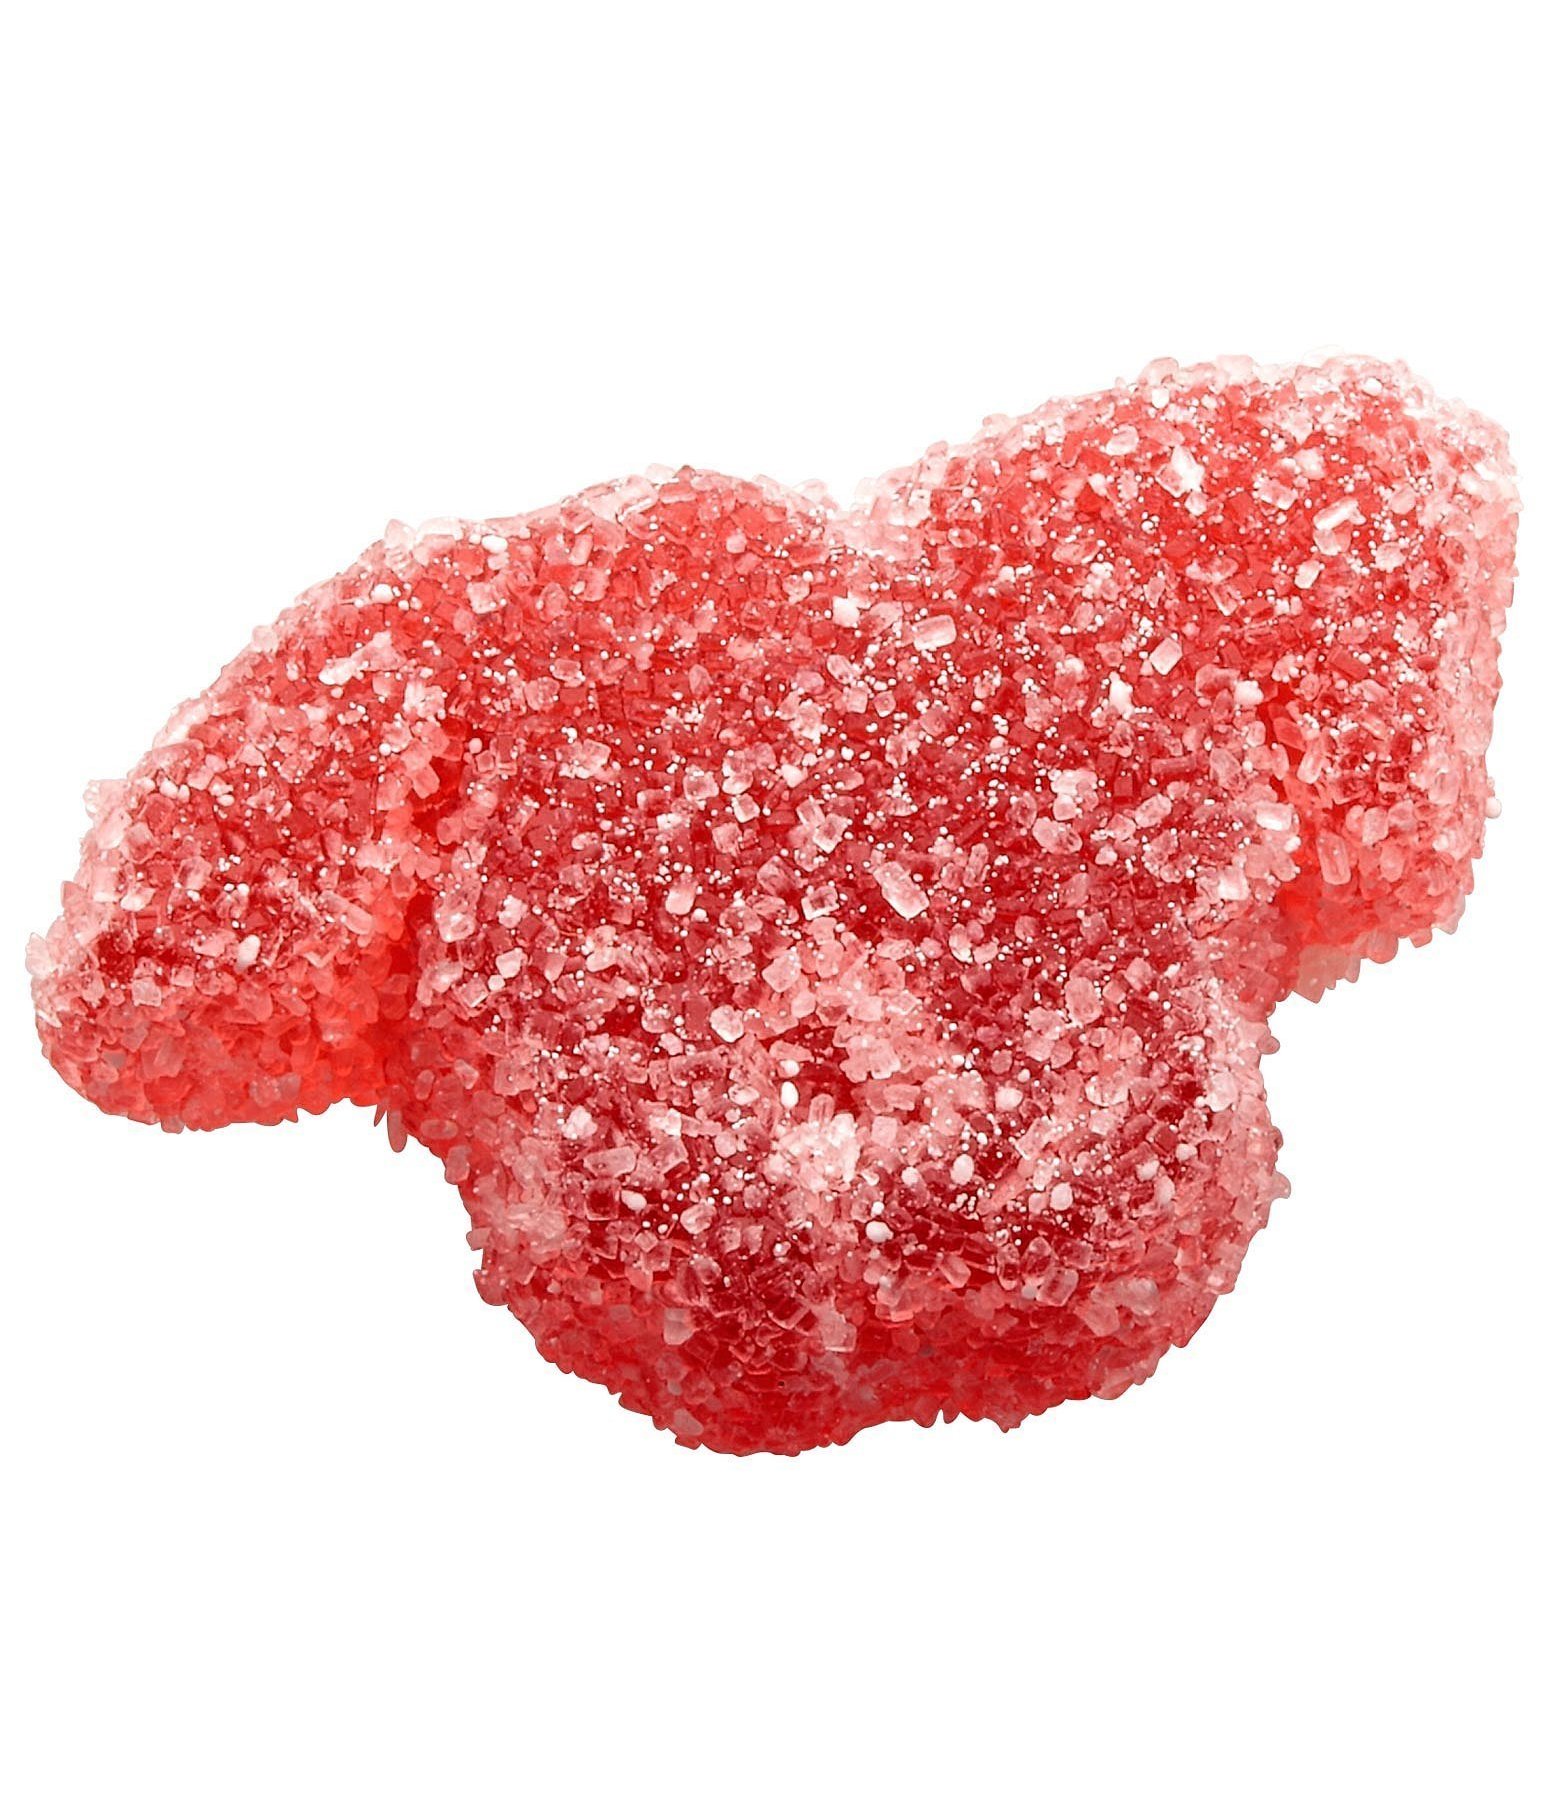 Horse-Shaped Sour Candy